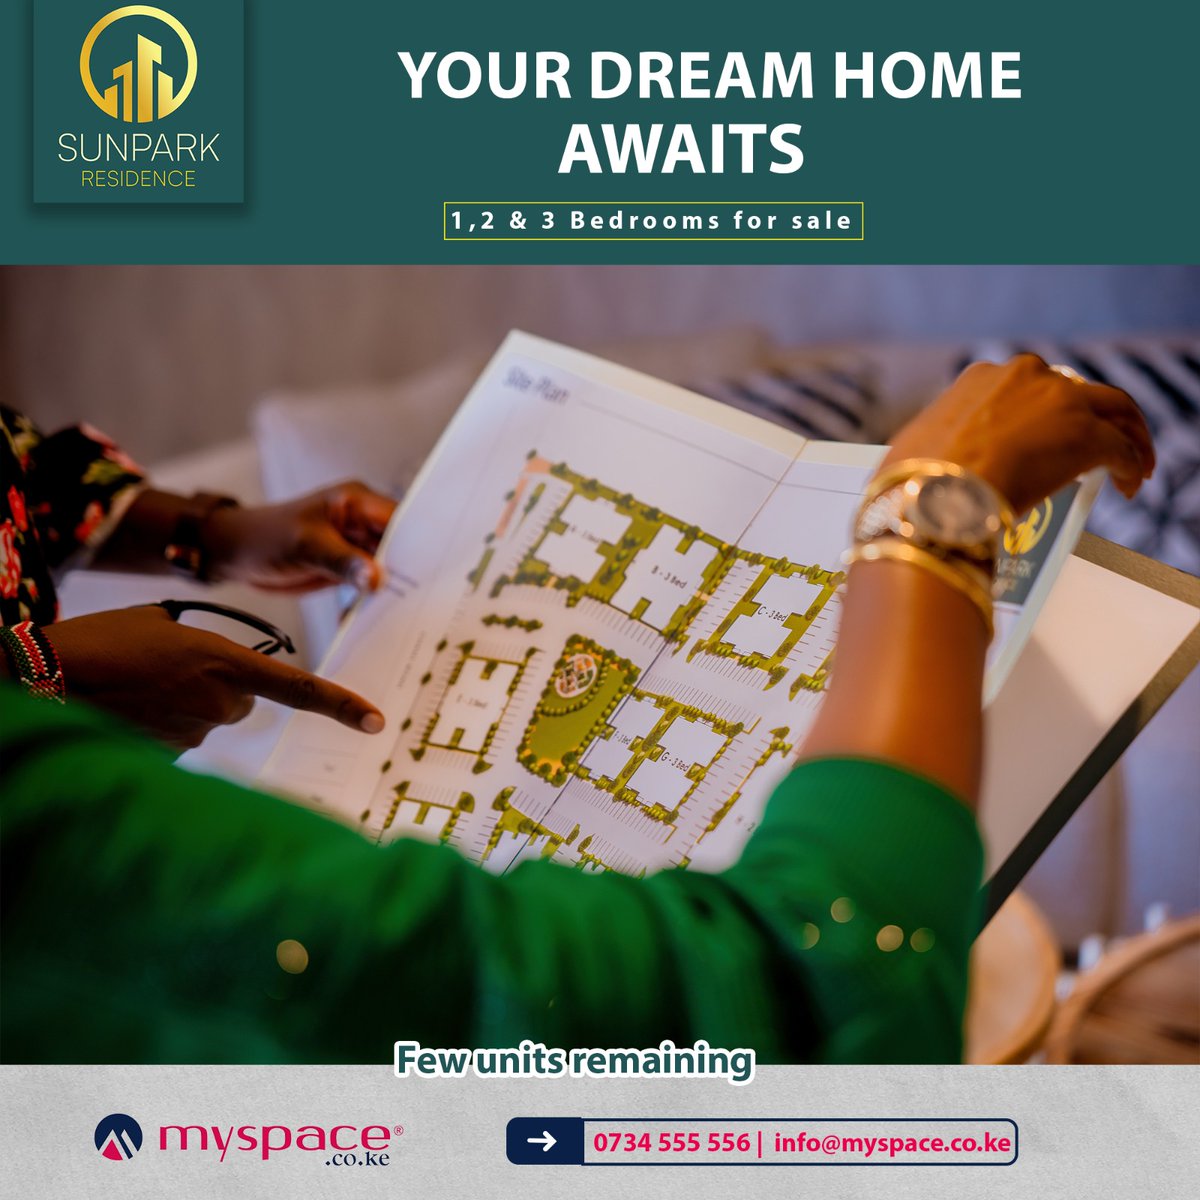 Secure your slice of paradise today in the vibrant community of Syokimau! With beautiful homes and excellent amenities, Syokimau is the perfect place to call home. Don't wait any longer – let us help you find your dream home today! #DreamHome #SyokimauLiving #FindYourHome